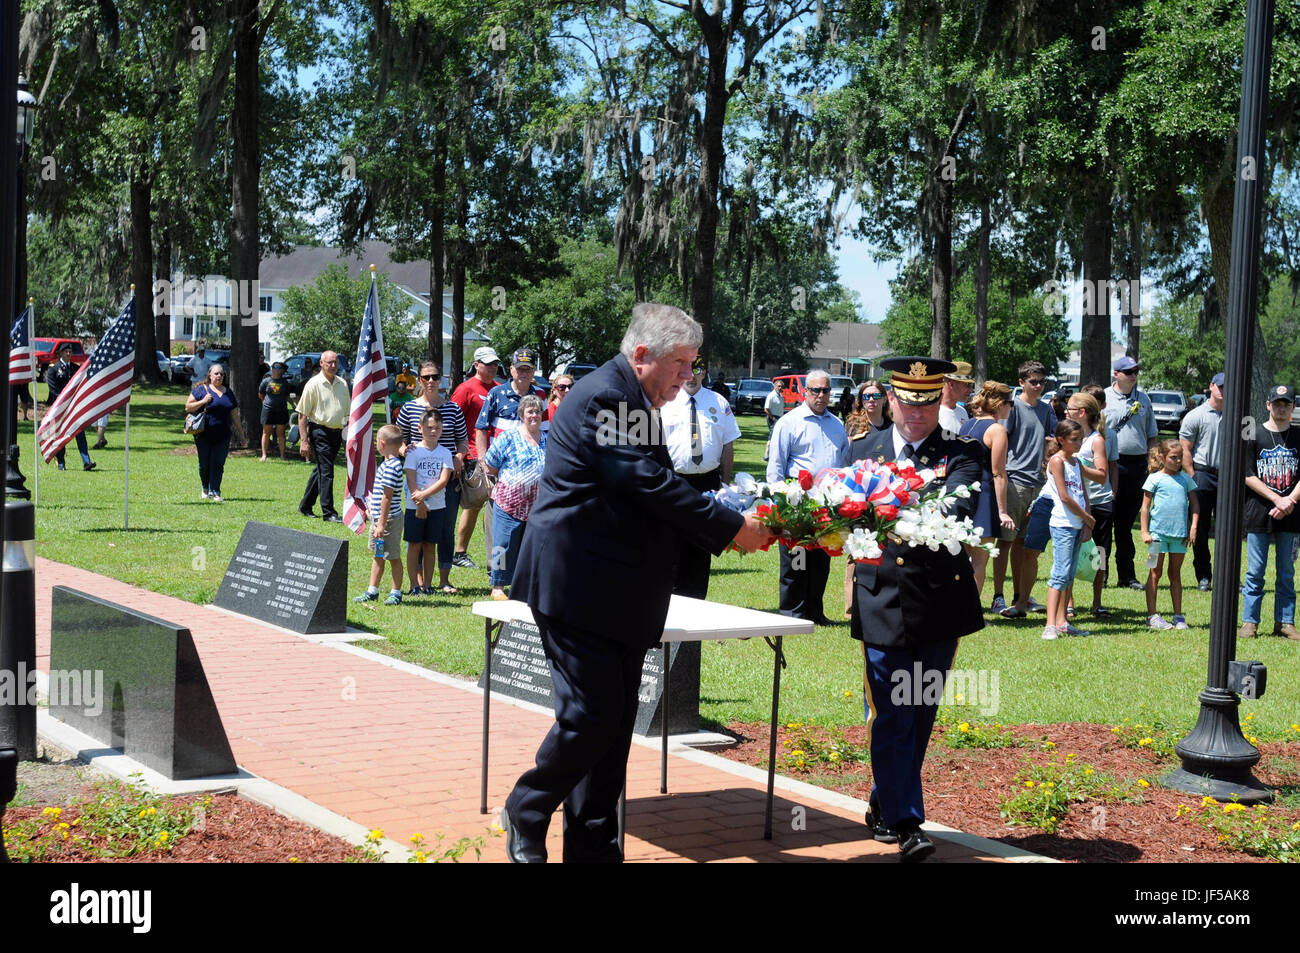 Harold Fowler, mayor of Richmond Hill, Ga., and Lt. Col. Chris McCreery, commander of the 87th Combat Sustainment Support Battalion, 3rd Infantry Division Sustainment Brigade, carry a wreath to the Richmond Hill Veterans’ Monument during the Richmond Hill Memorial Day Observance May 29. Including McCreery as the guest speaker, the event hosted speakers from local Veterans of Foreign Wars and American Legion posts. (U.S. Army photo by Sgt. 1st Class Ben K. Navratil) Stock Photo